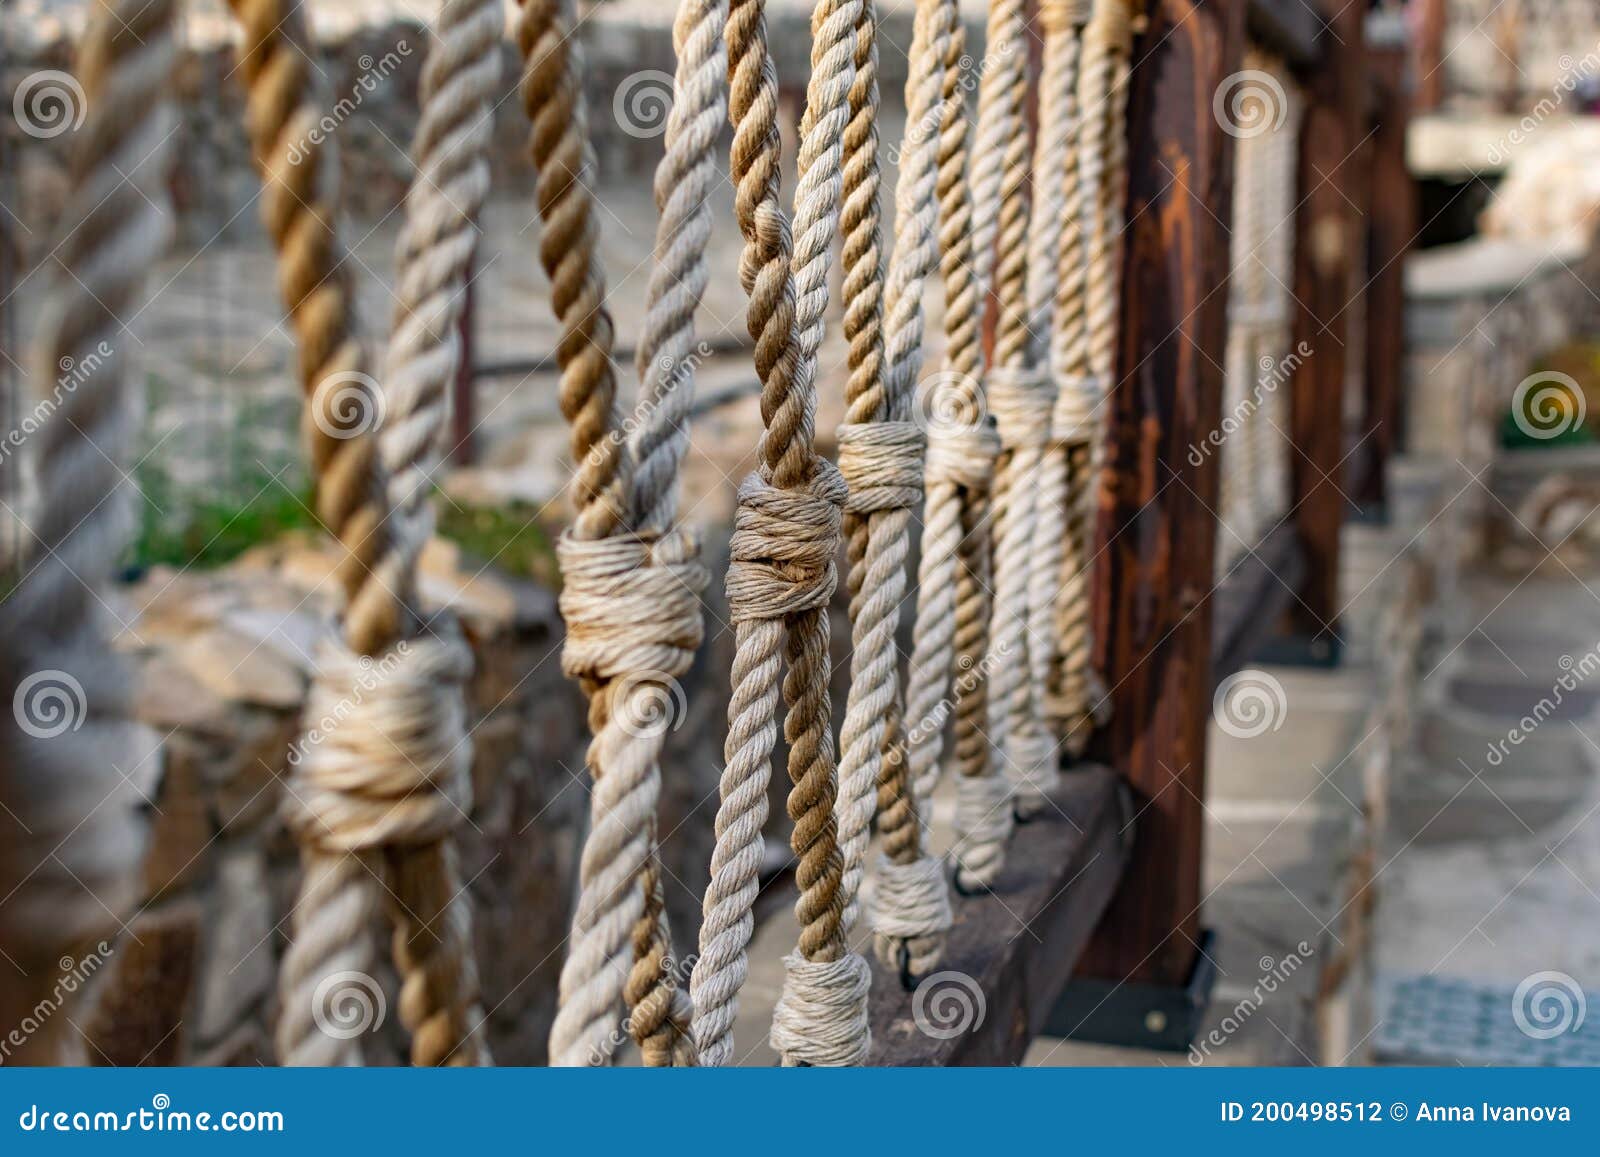 Thick rope ropes, intertwined crosswise, hang on wooden railings